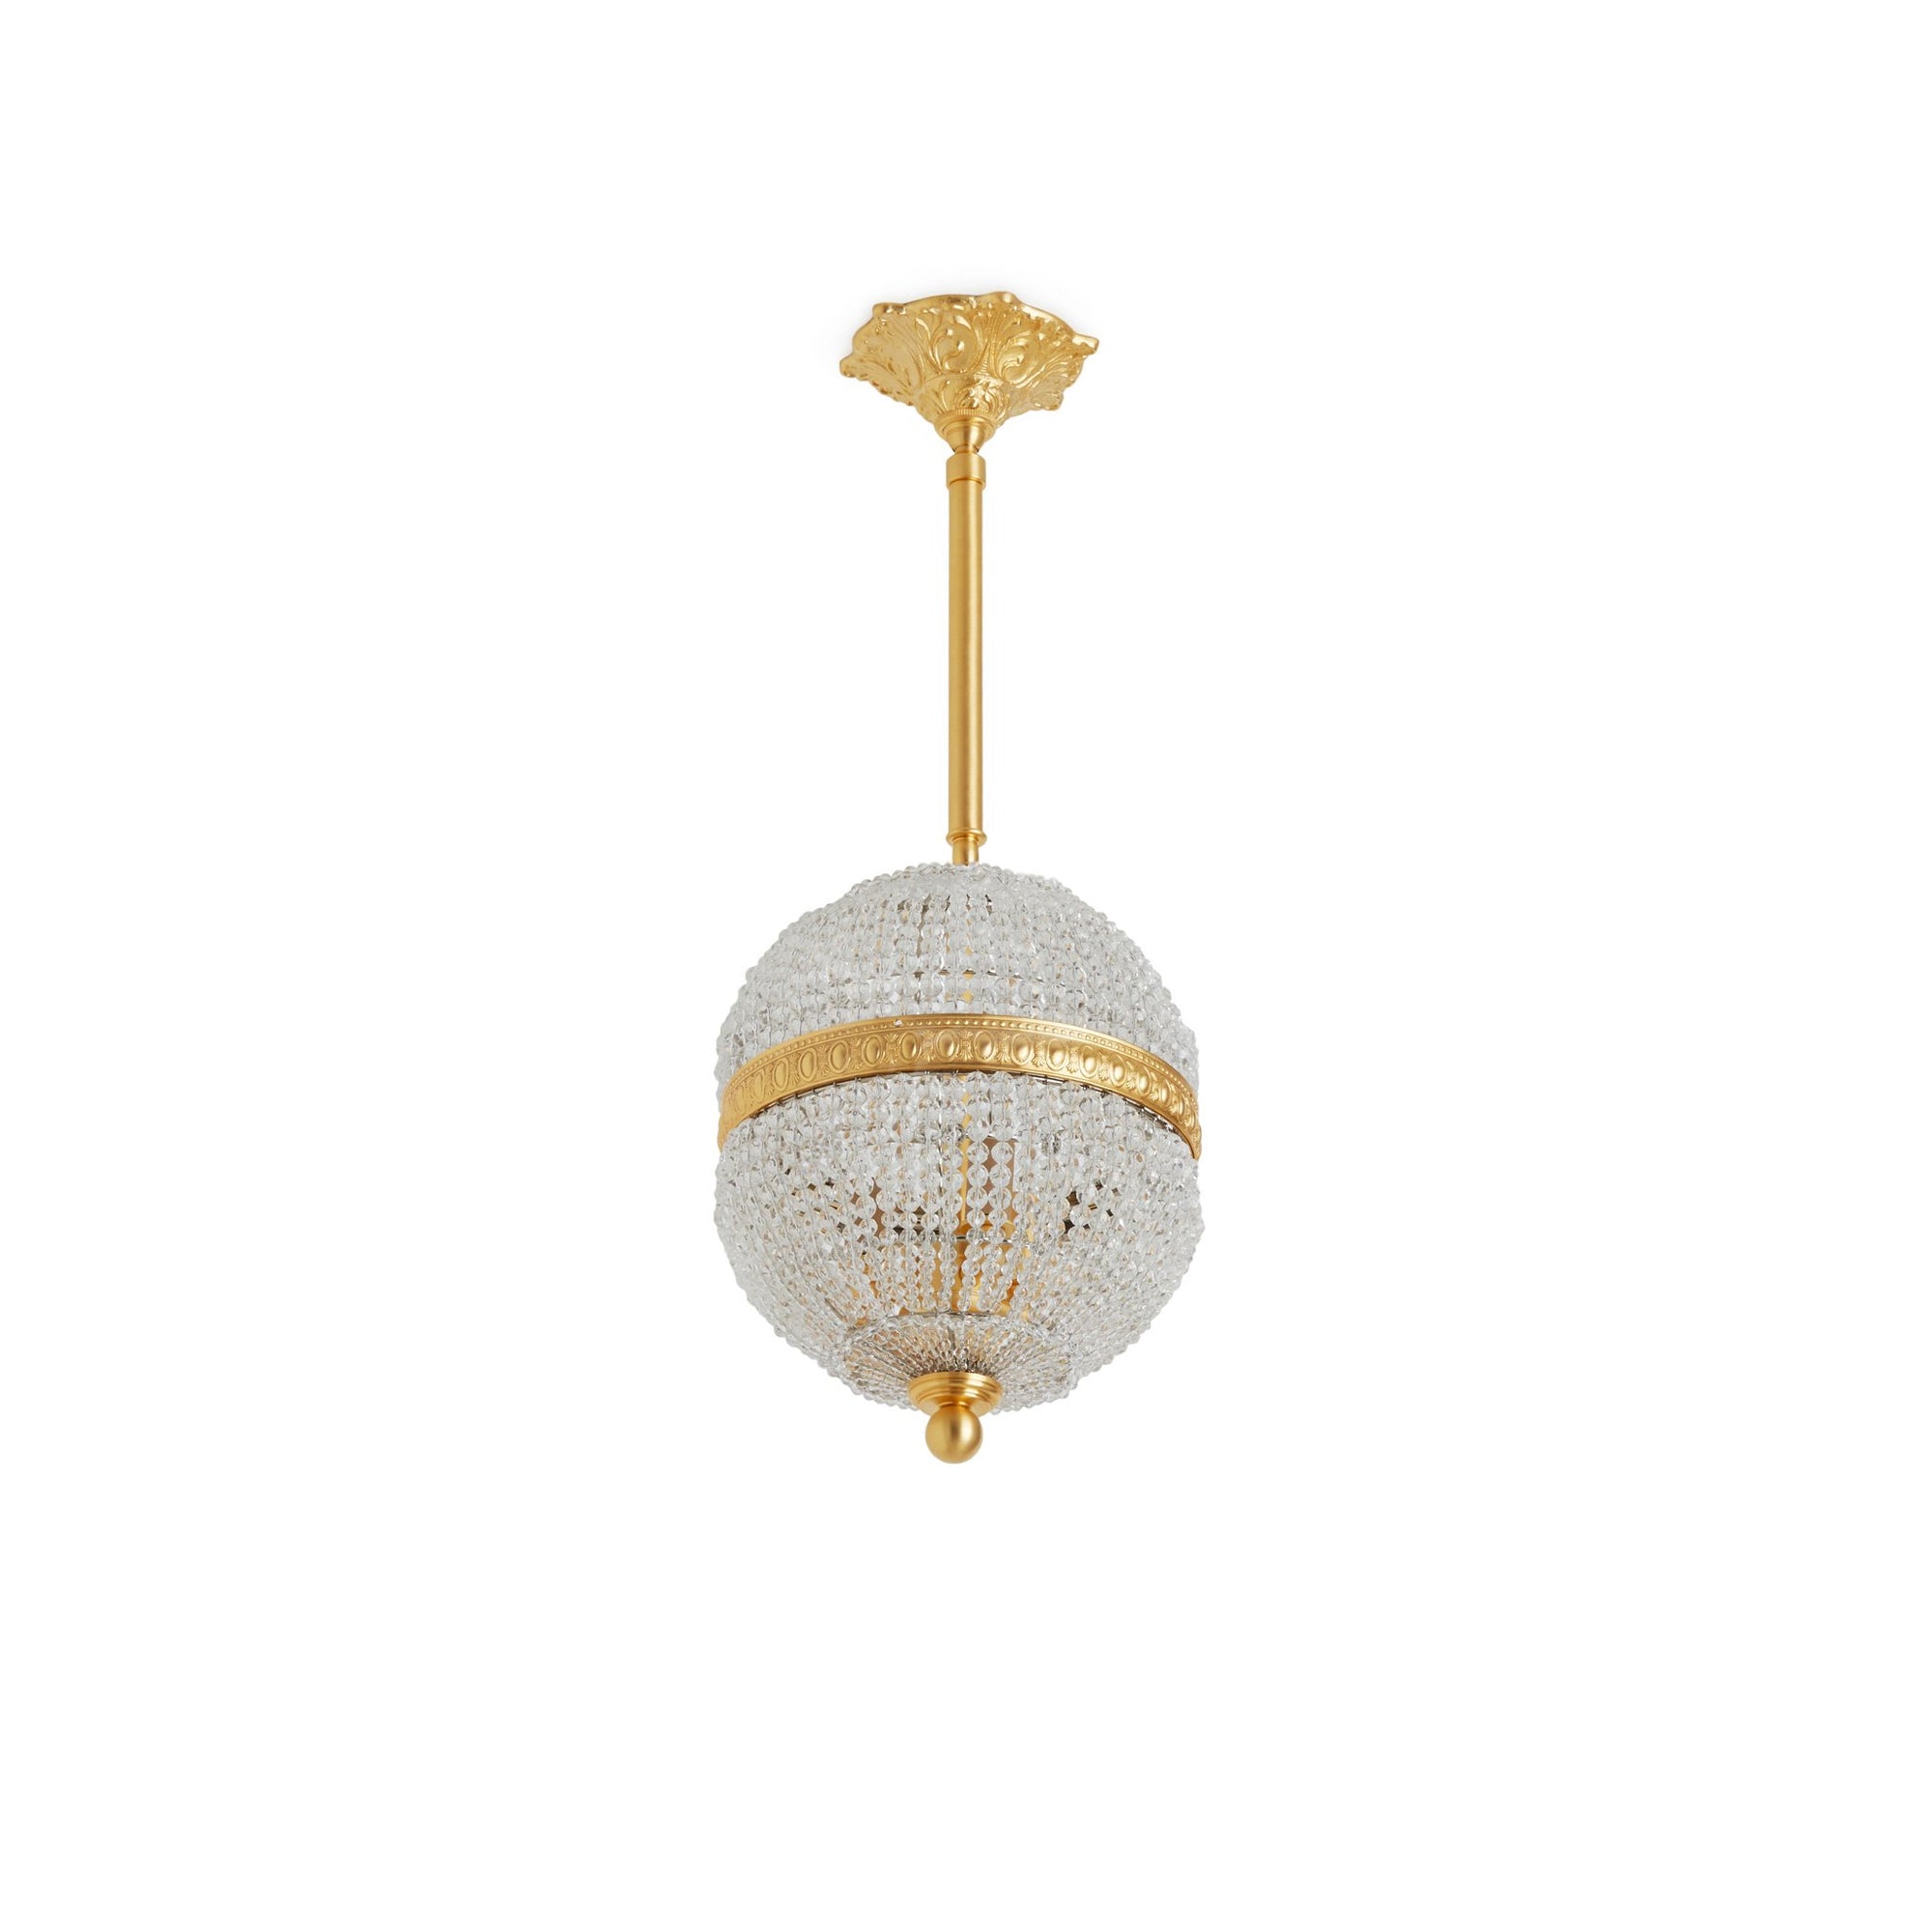 7108-PNDT-GP Sherle Wagner International Globe Crystal Beaded Pendant Light 8 inches in Gold plate metal finish